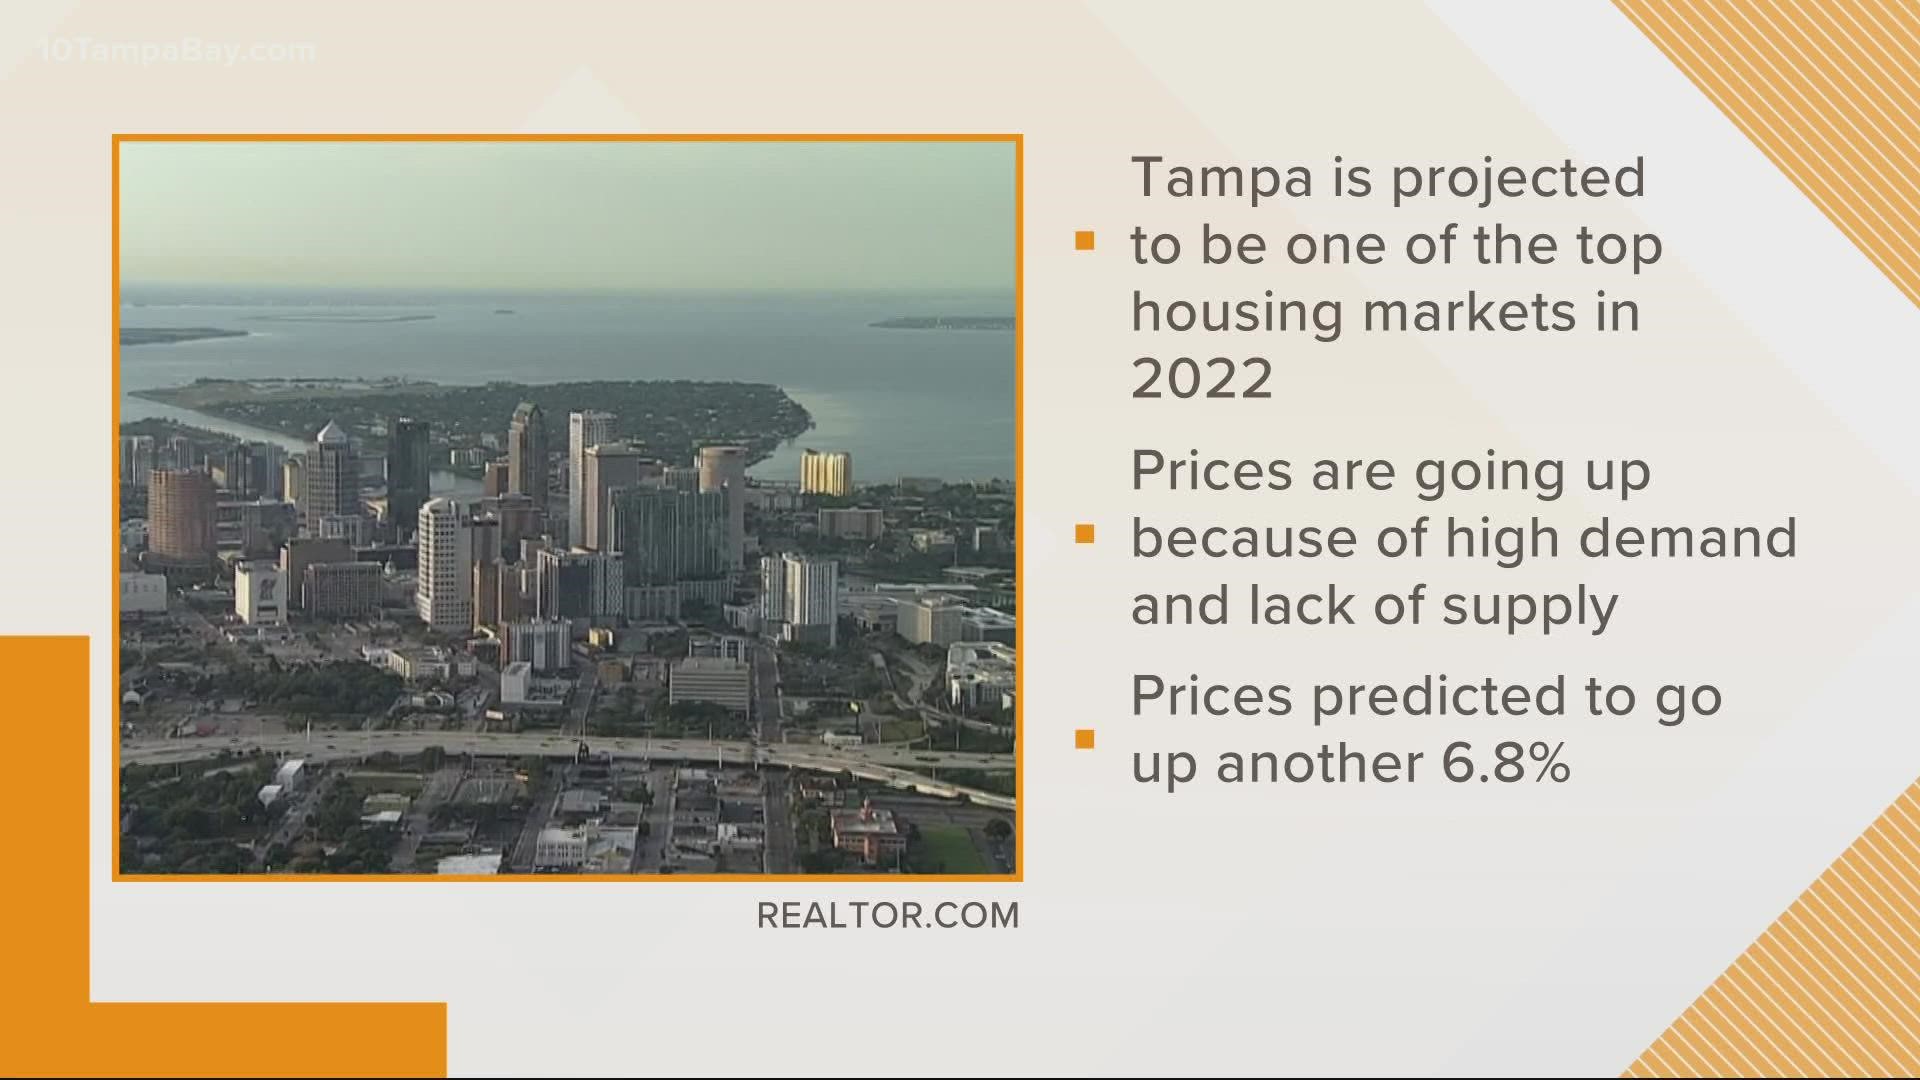 Realtors say it's not just the sunny sky and beautiful beaches that make Tampa a destination.